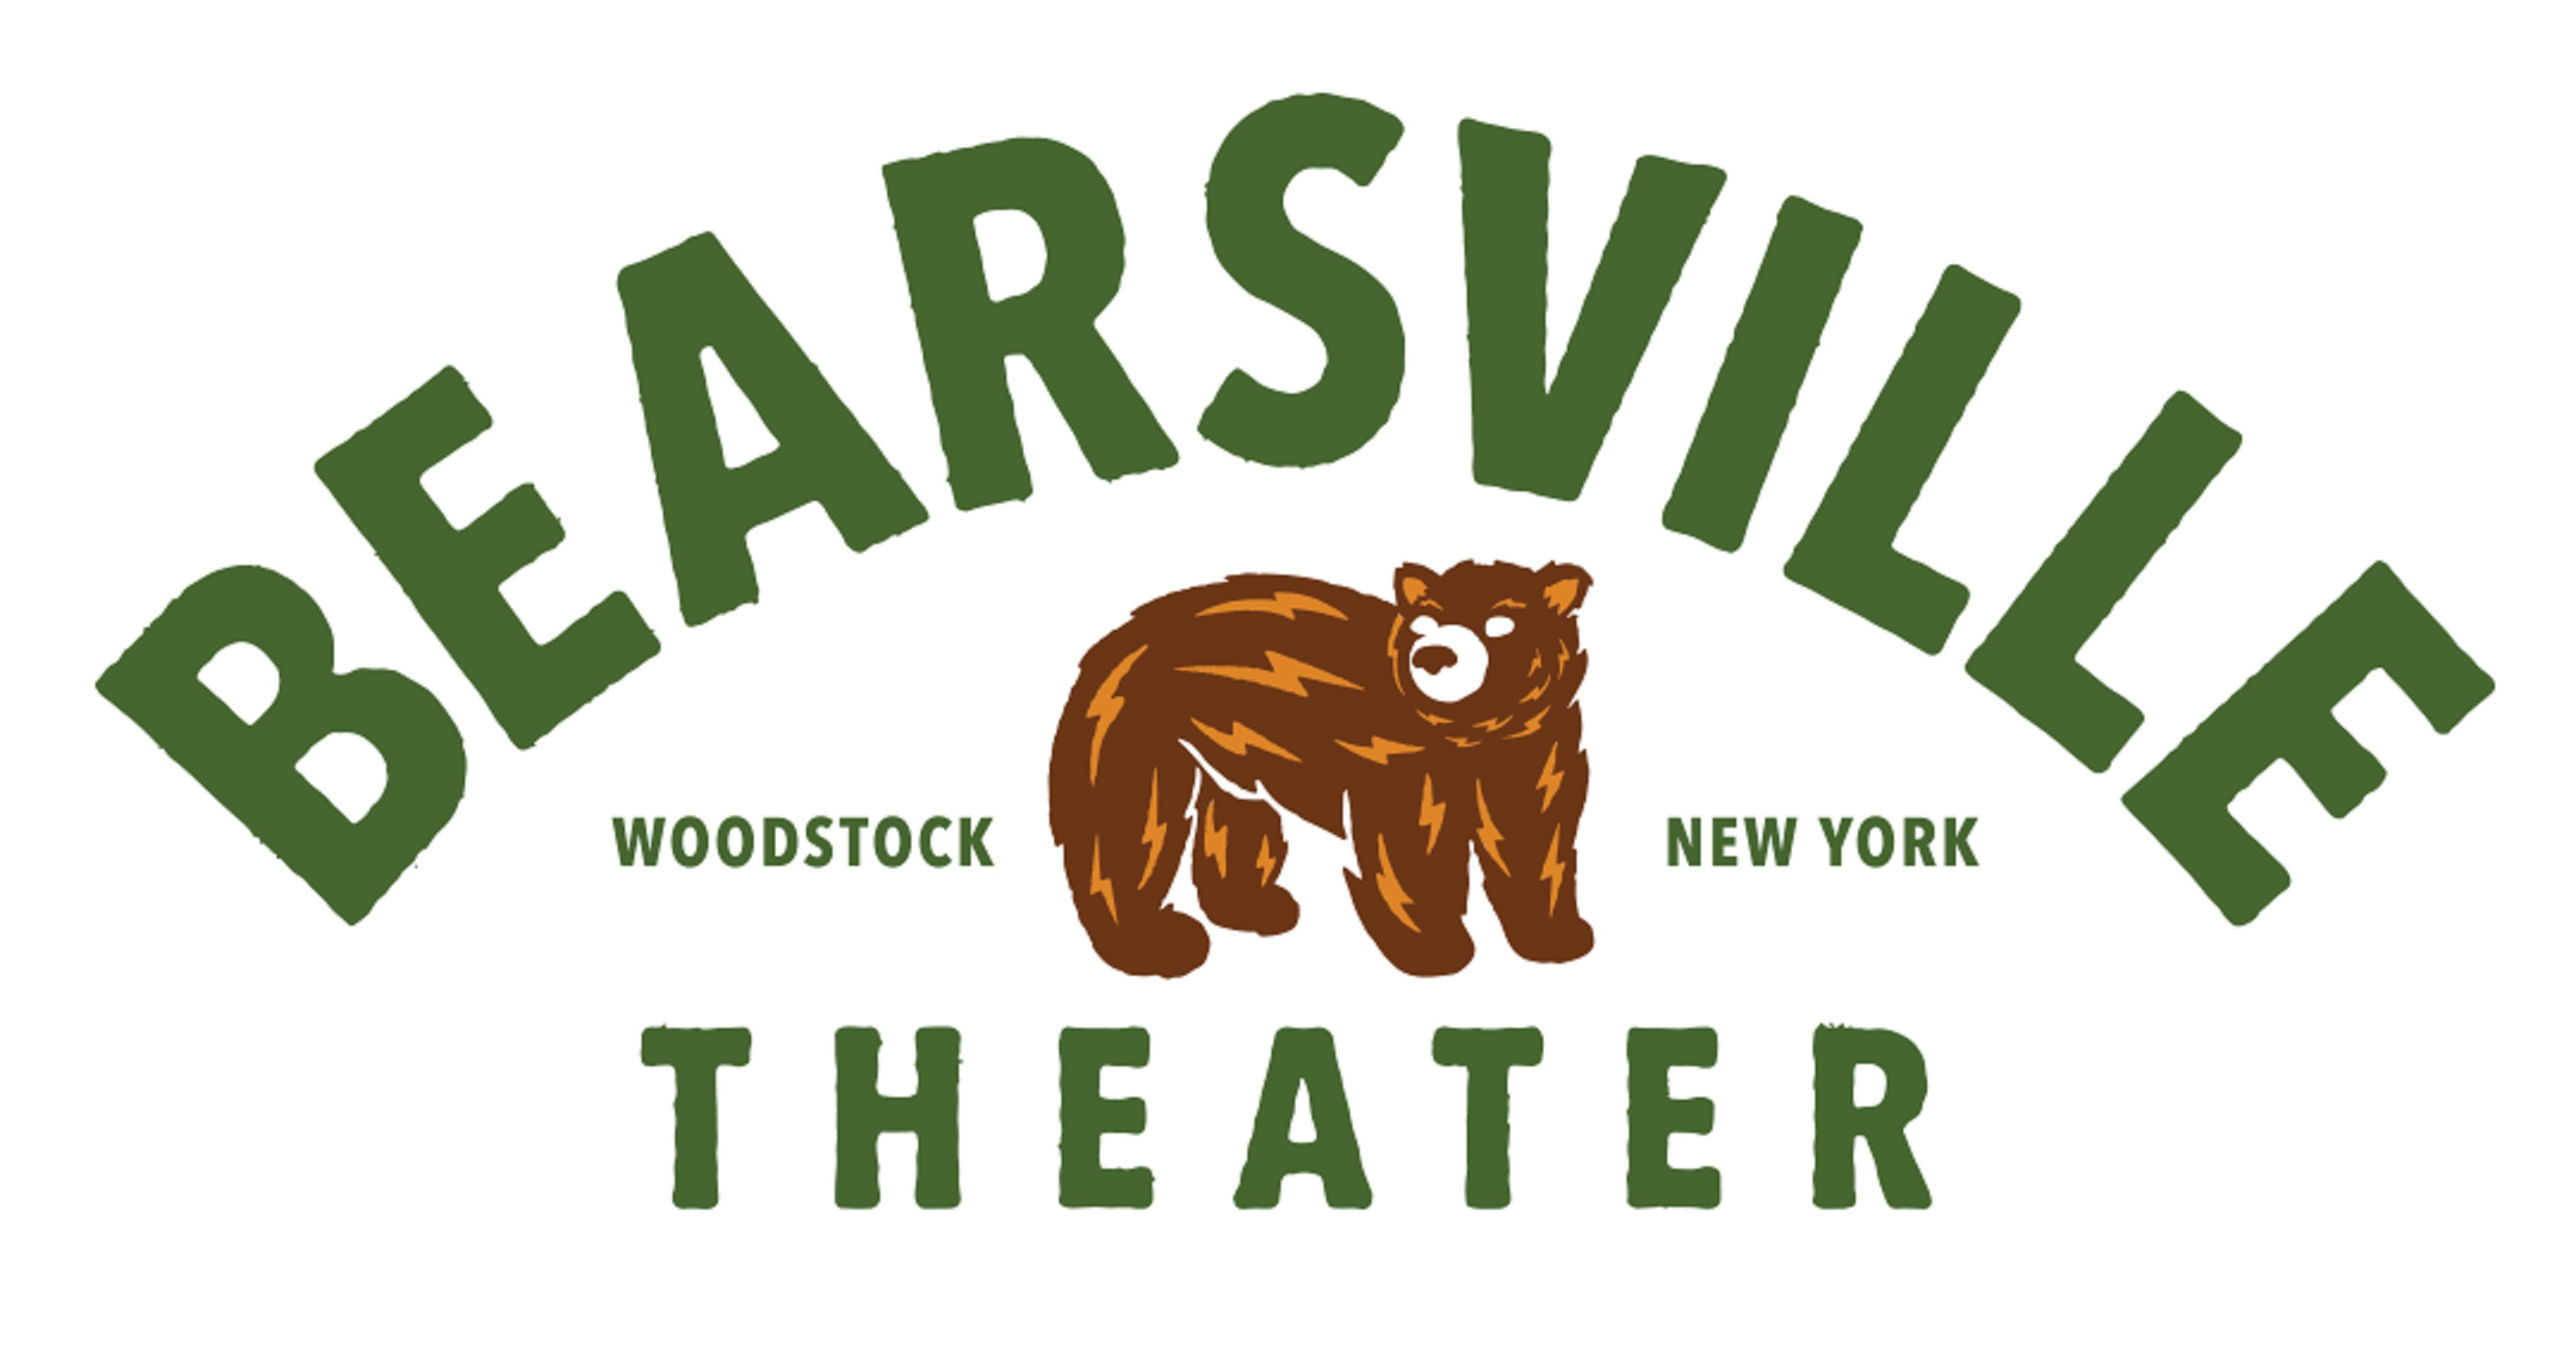 Woodstock's legendary Bearsville Theater reopening this summer with lineup ft. Guster, Drive-By Truckers & more